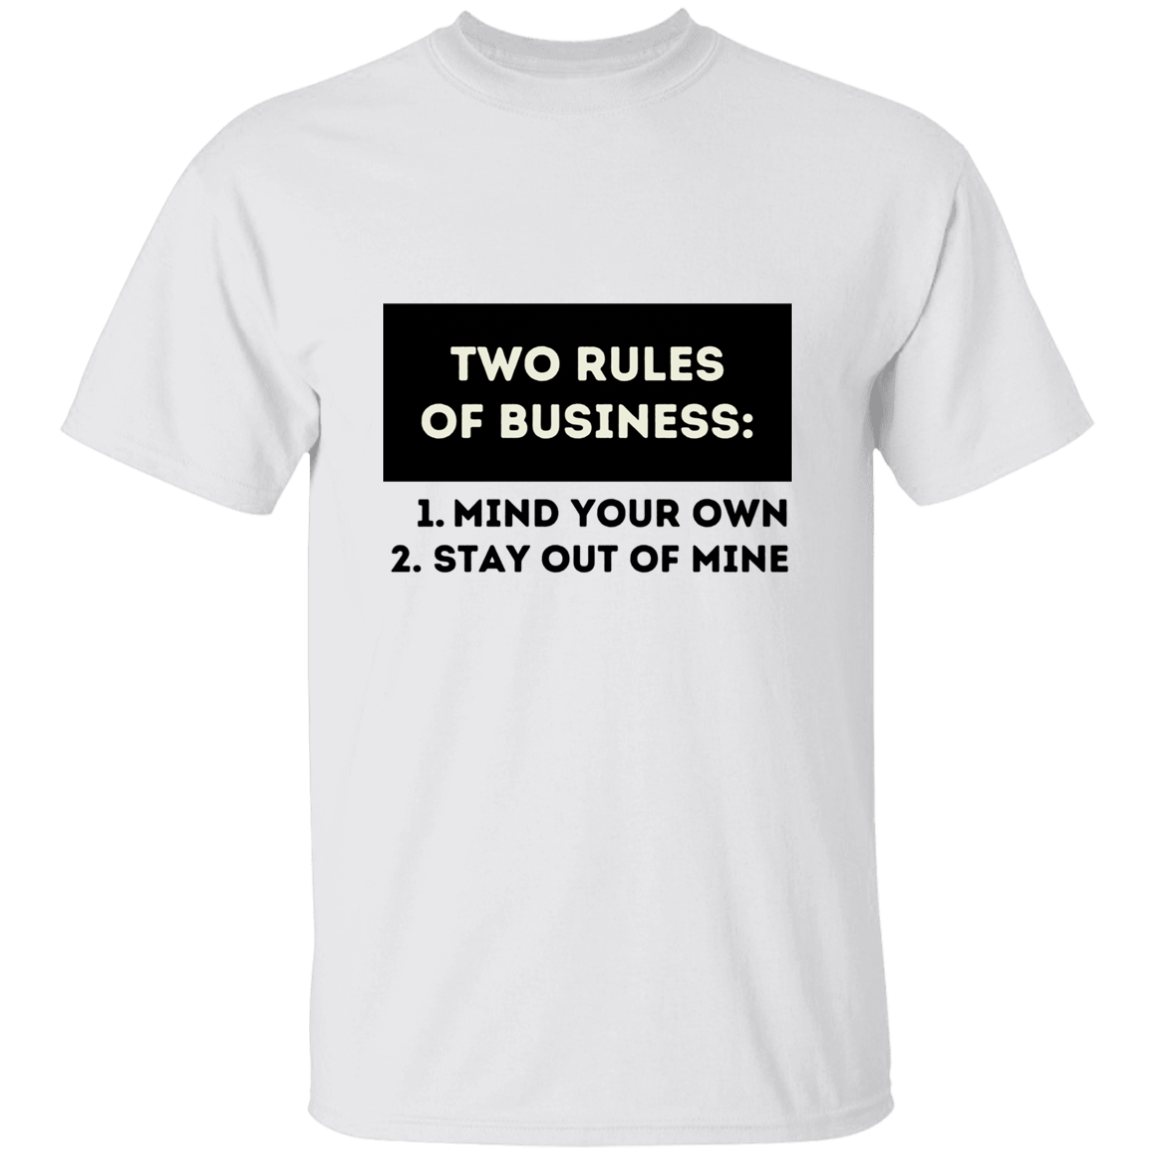 Two Rules of Business T-Shirt, Funny Quote Shirts, Feminist Shirt, Novelty T-shirt, Sarcastic T-shirt